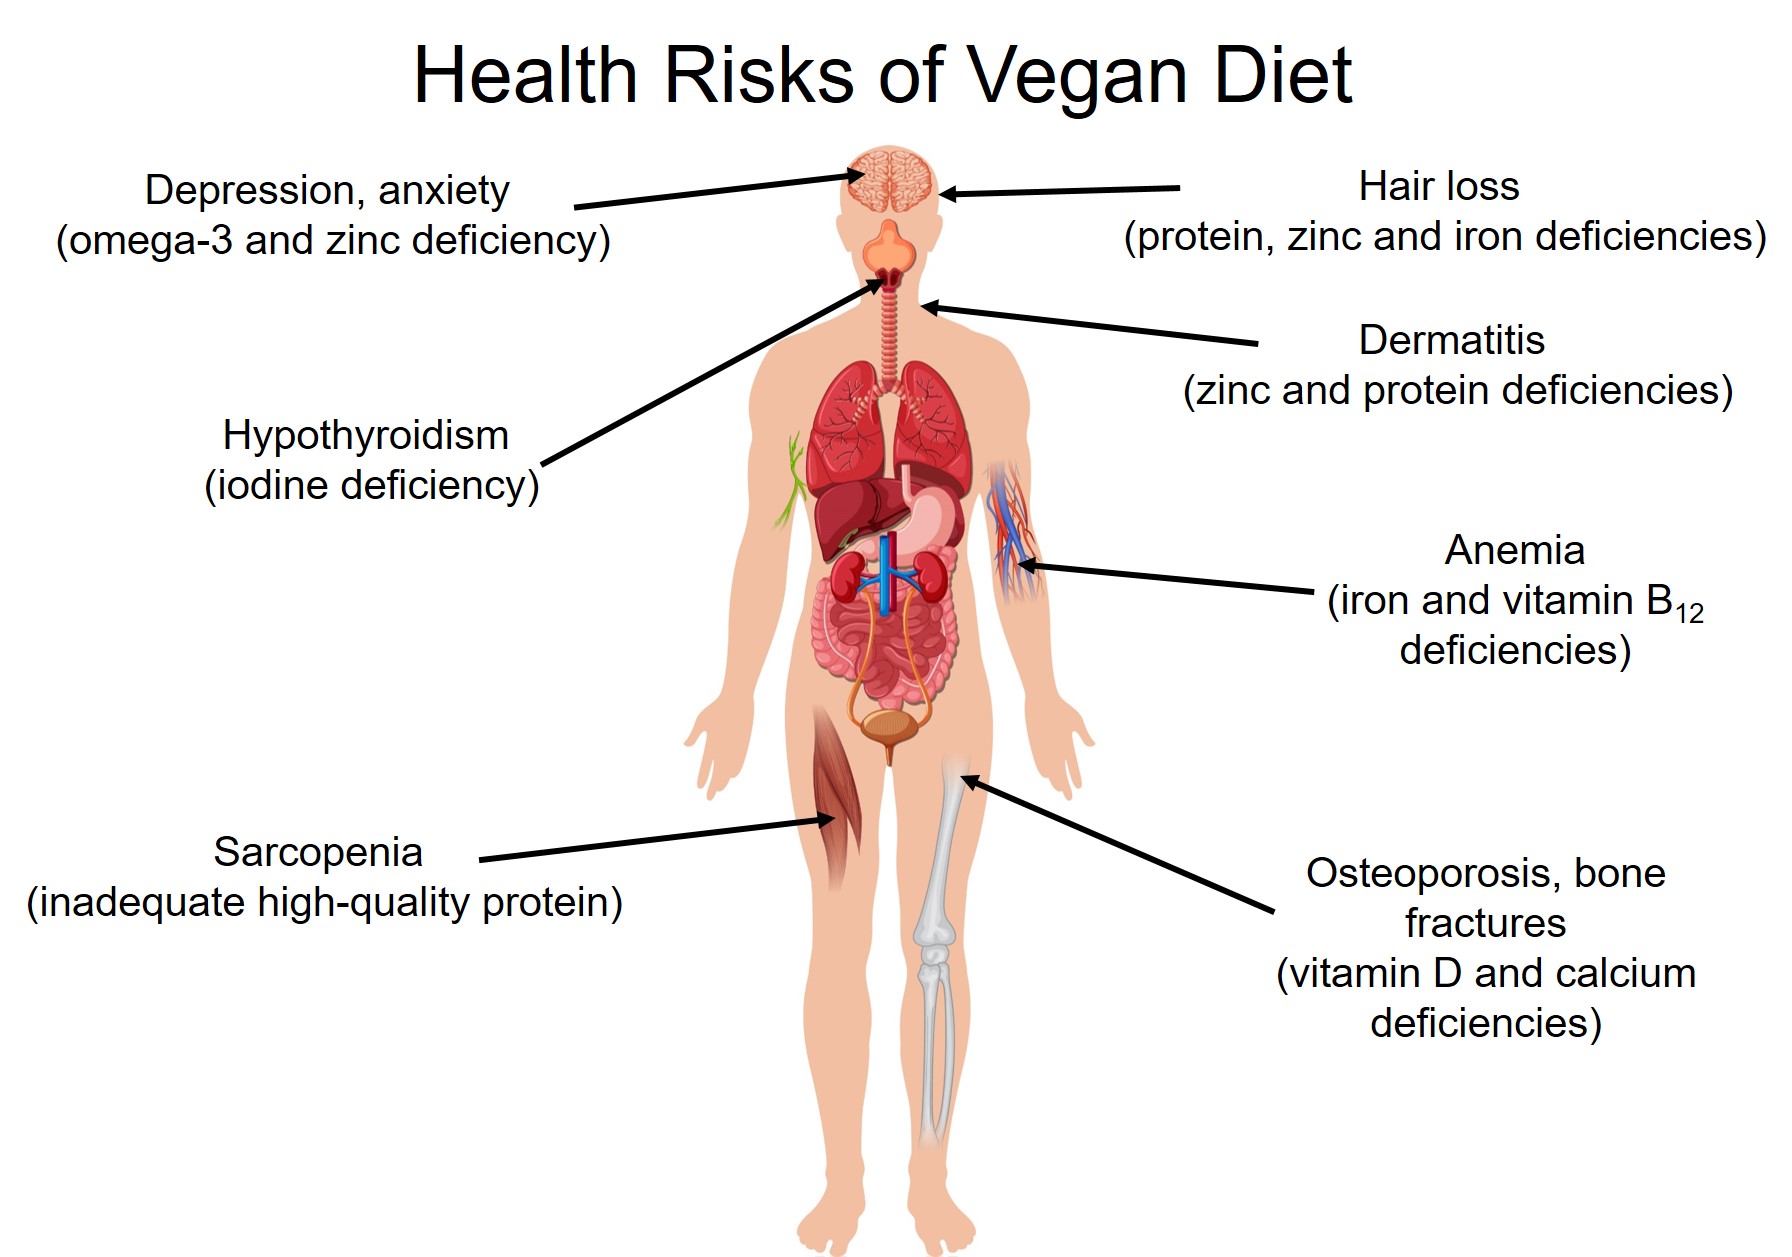 Research Shows Vegan Diet Leads to Nutritional Deficiencies, Health  Problems; Plant-Forward Omnivorous Whole Foods Diet Is Healthier